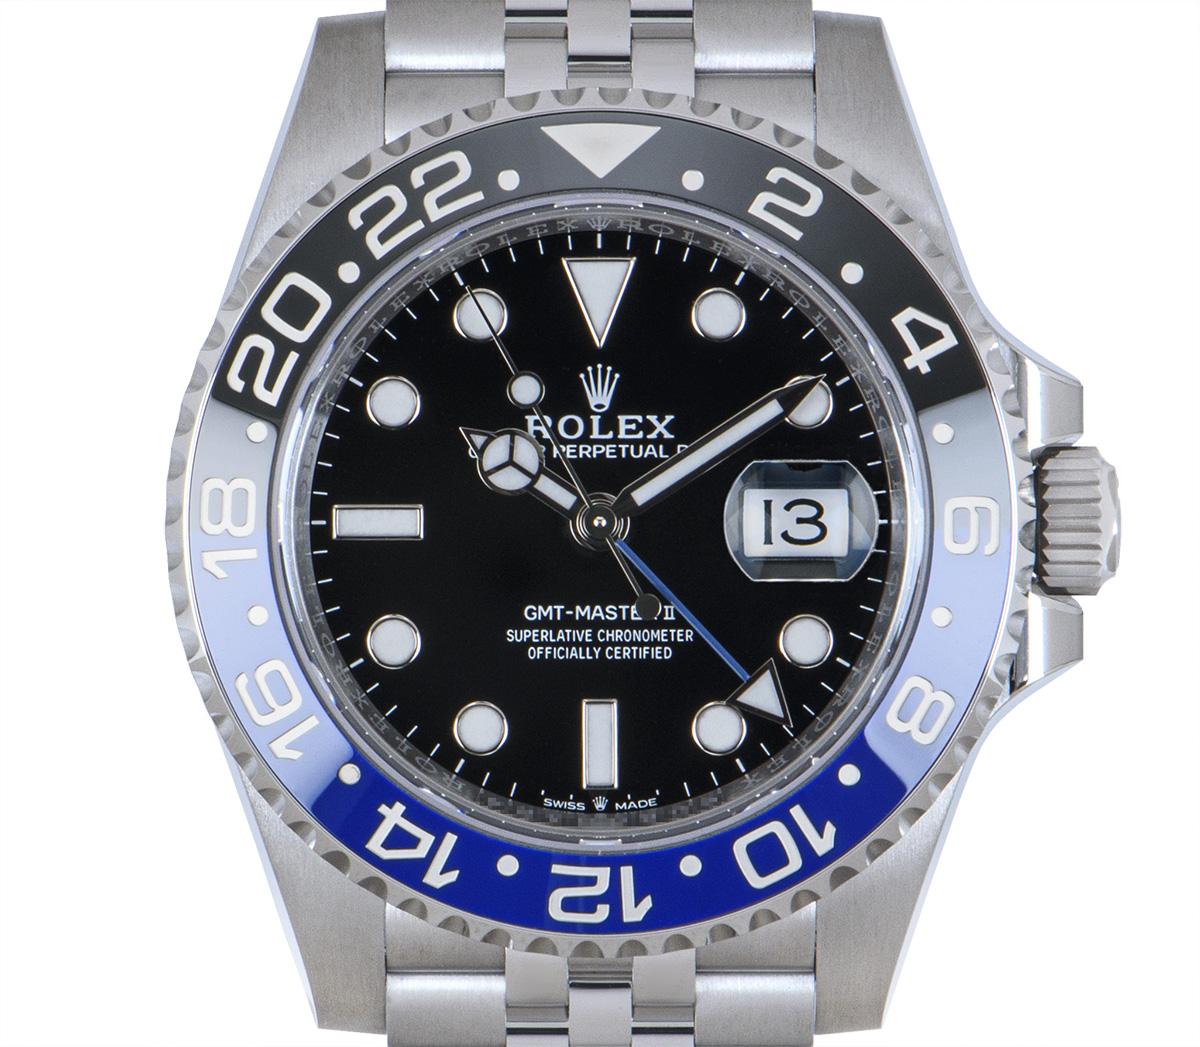 A GMT-Master II Batgirl in Oystersteel by Rolex. Featuring a black dial with the date and a blue second time zone hand. The ceramic two-colour blue and black bidirectional rotatable bezel features a graduated 24 hour display.

The 126710BLNR was